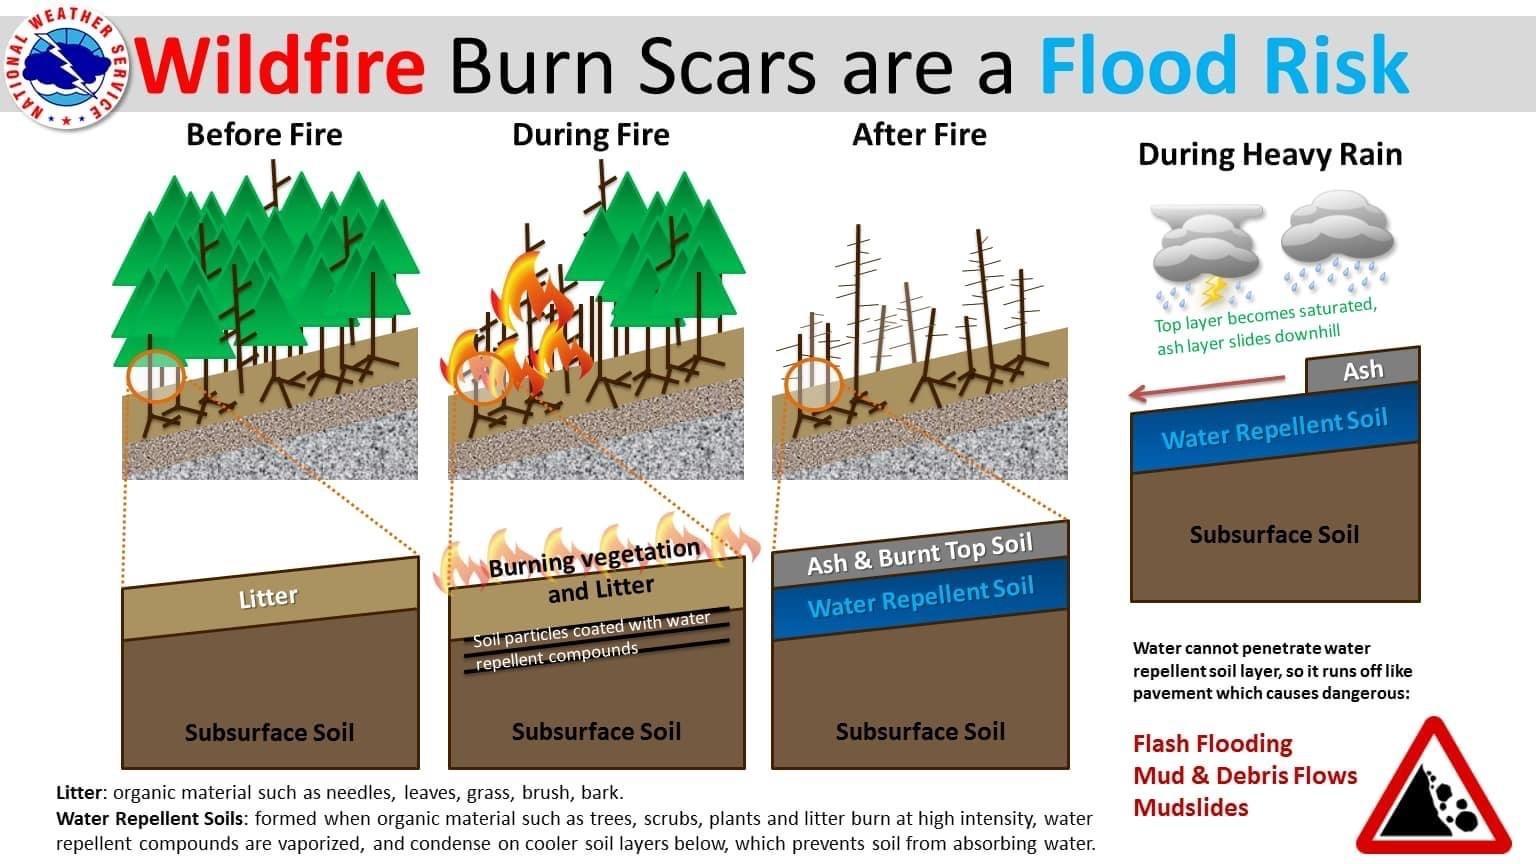 Image showing National Weather Service Reminder that Wildfire Burn Scars are a Flood Risk